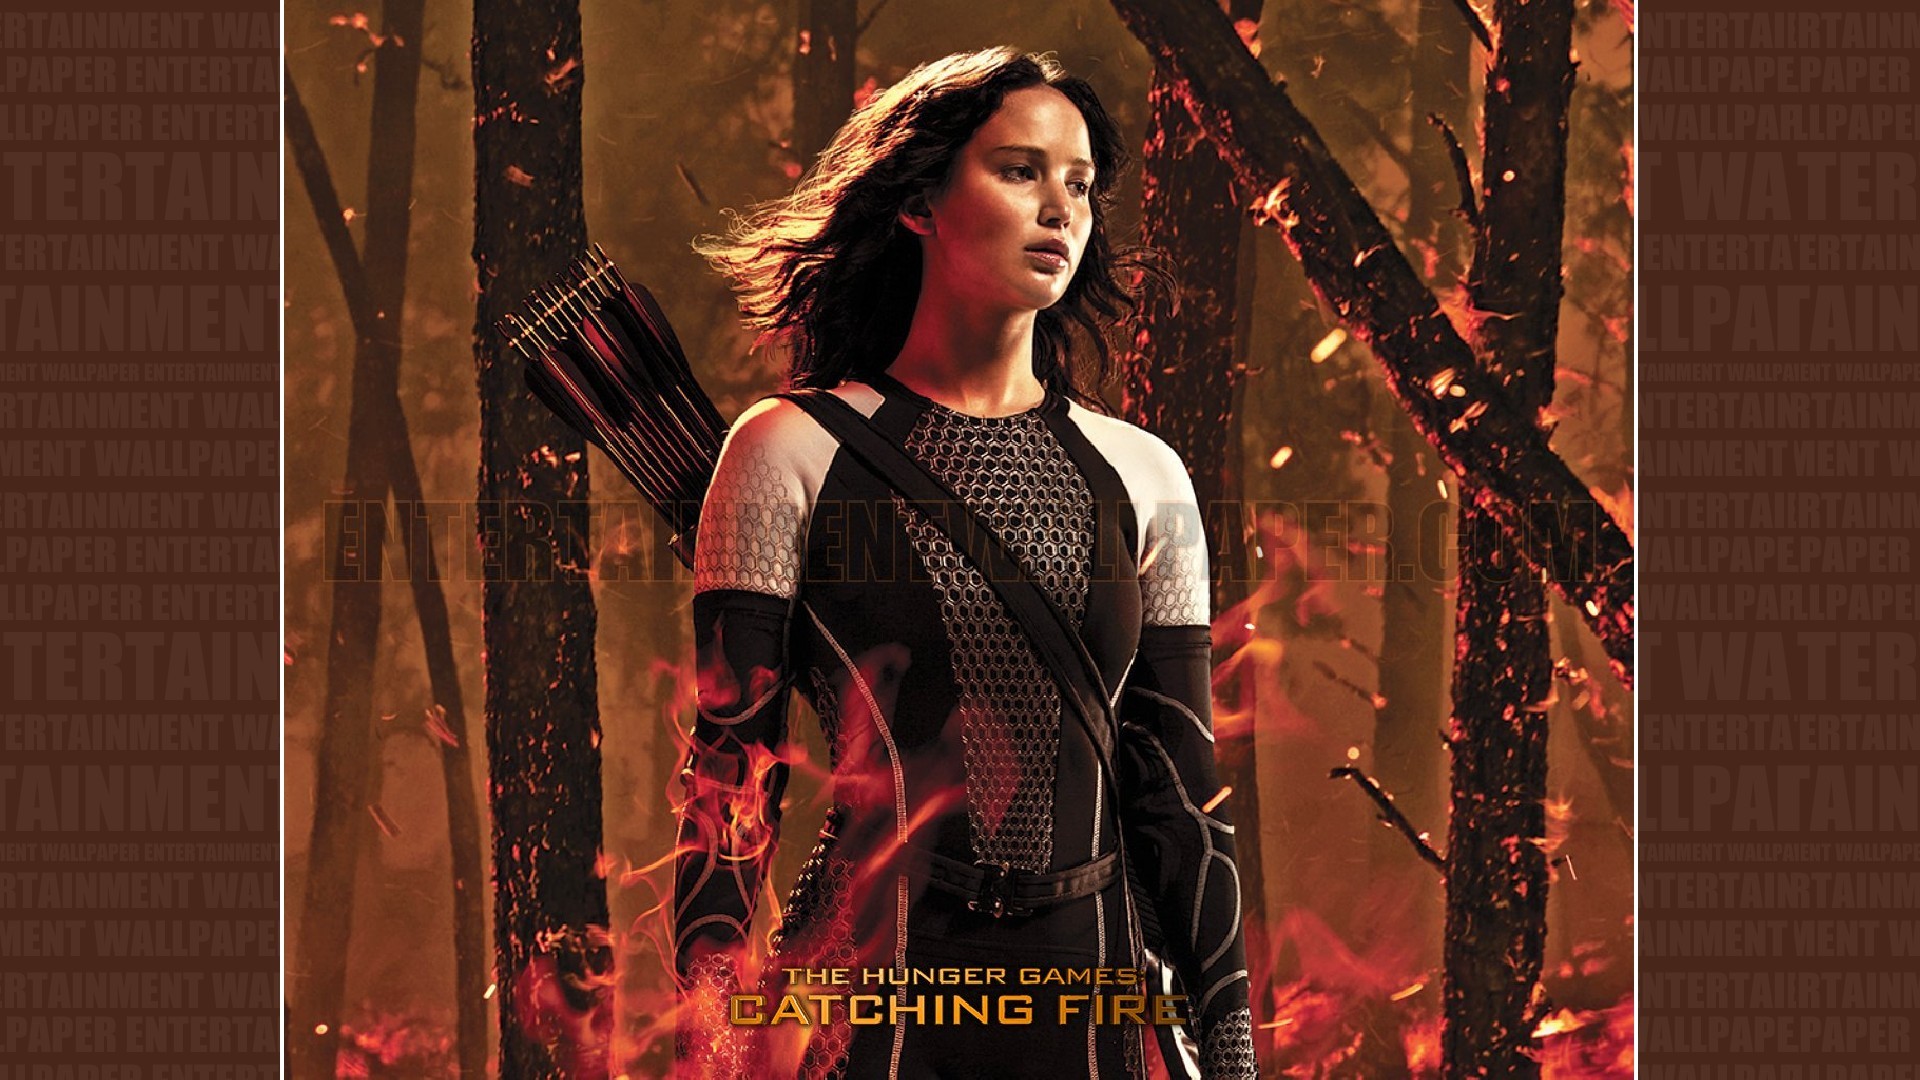 1920x1080 The Hunger Games: Catching Fire Wallpaper - Original size, download now.